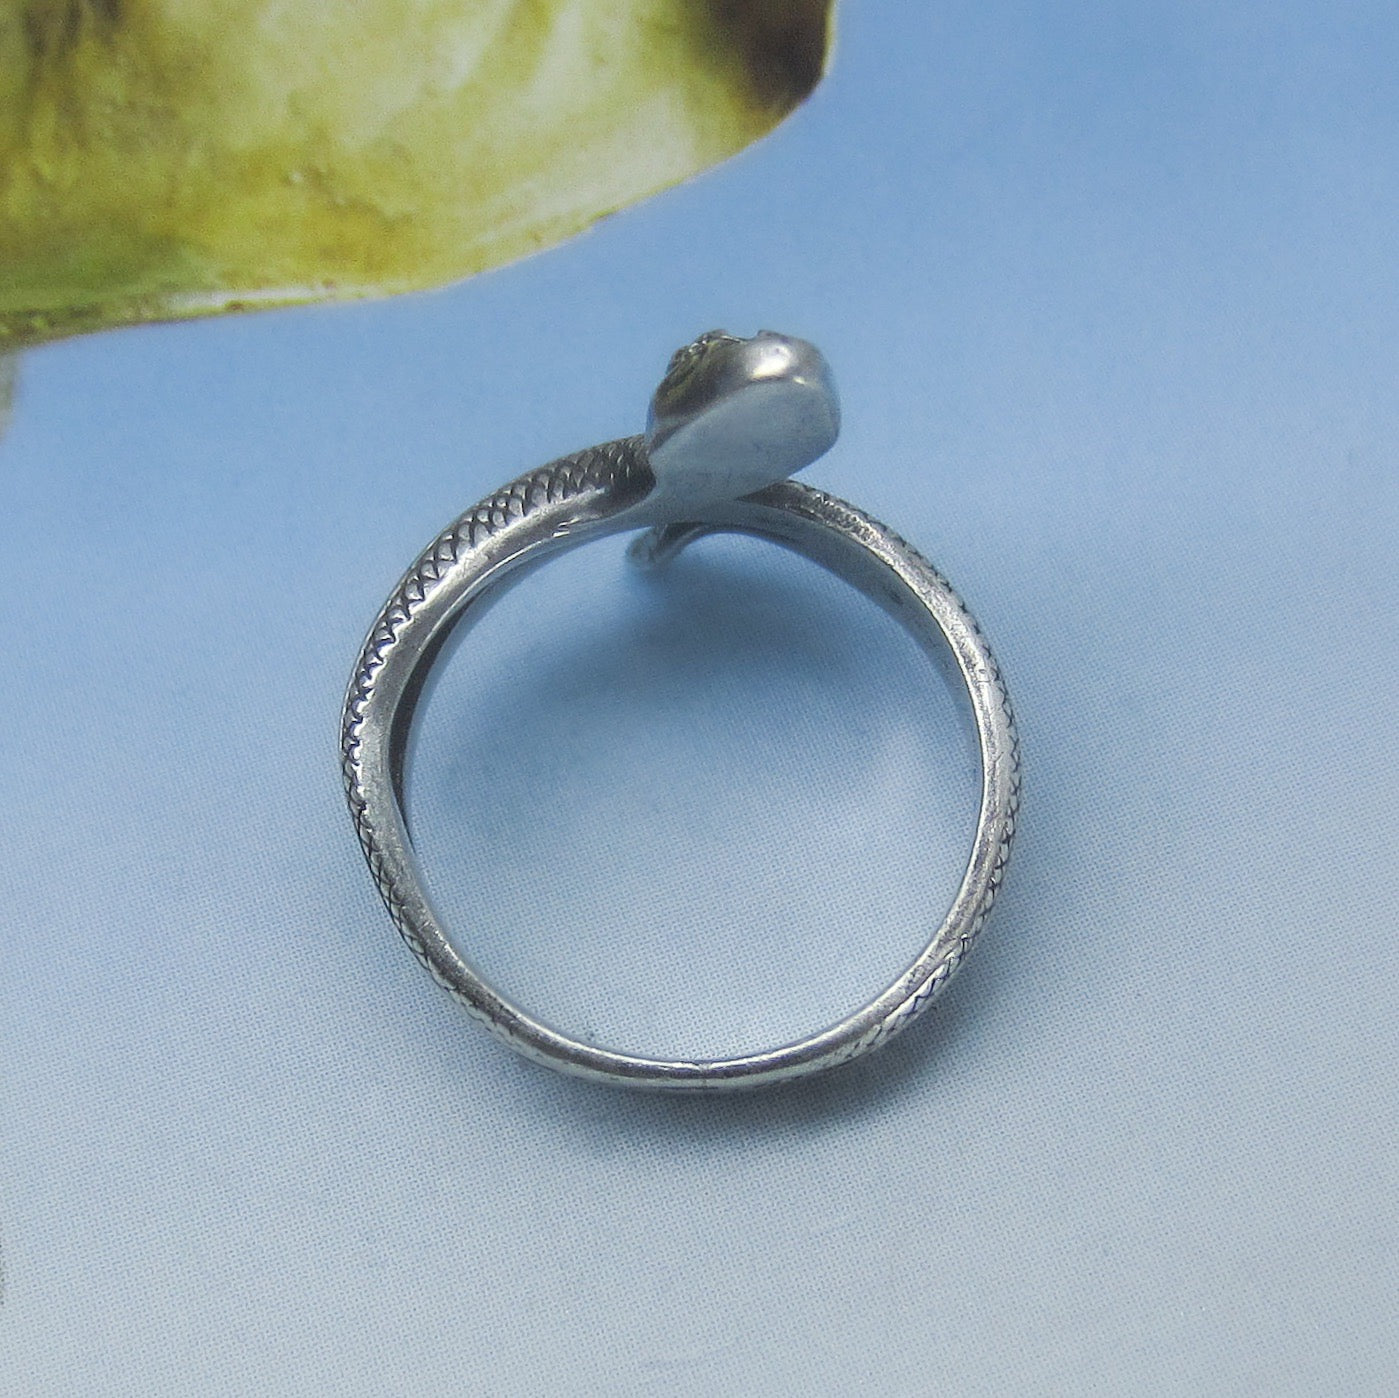 SOLD-Vintage Rose Cut Diamond Snake Ring Sterling, size 6.75 Russian c. 1970